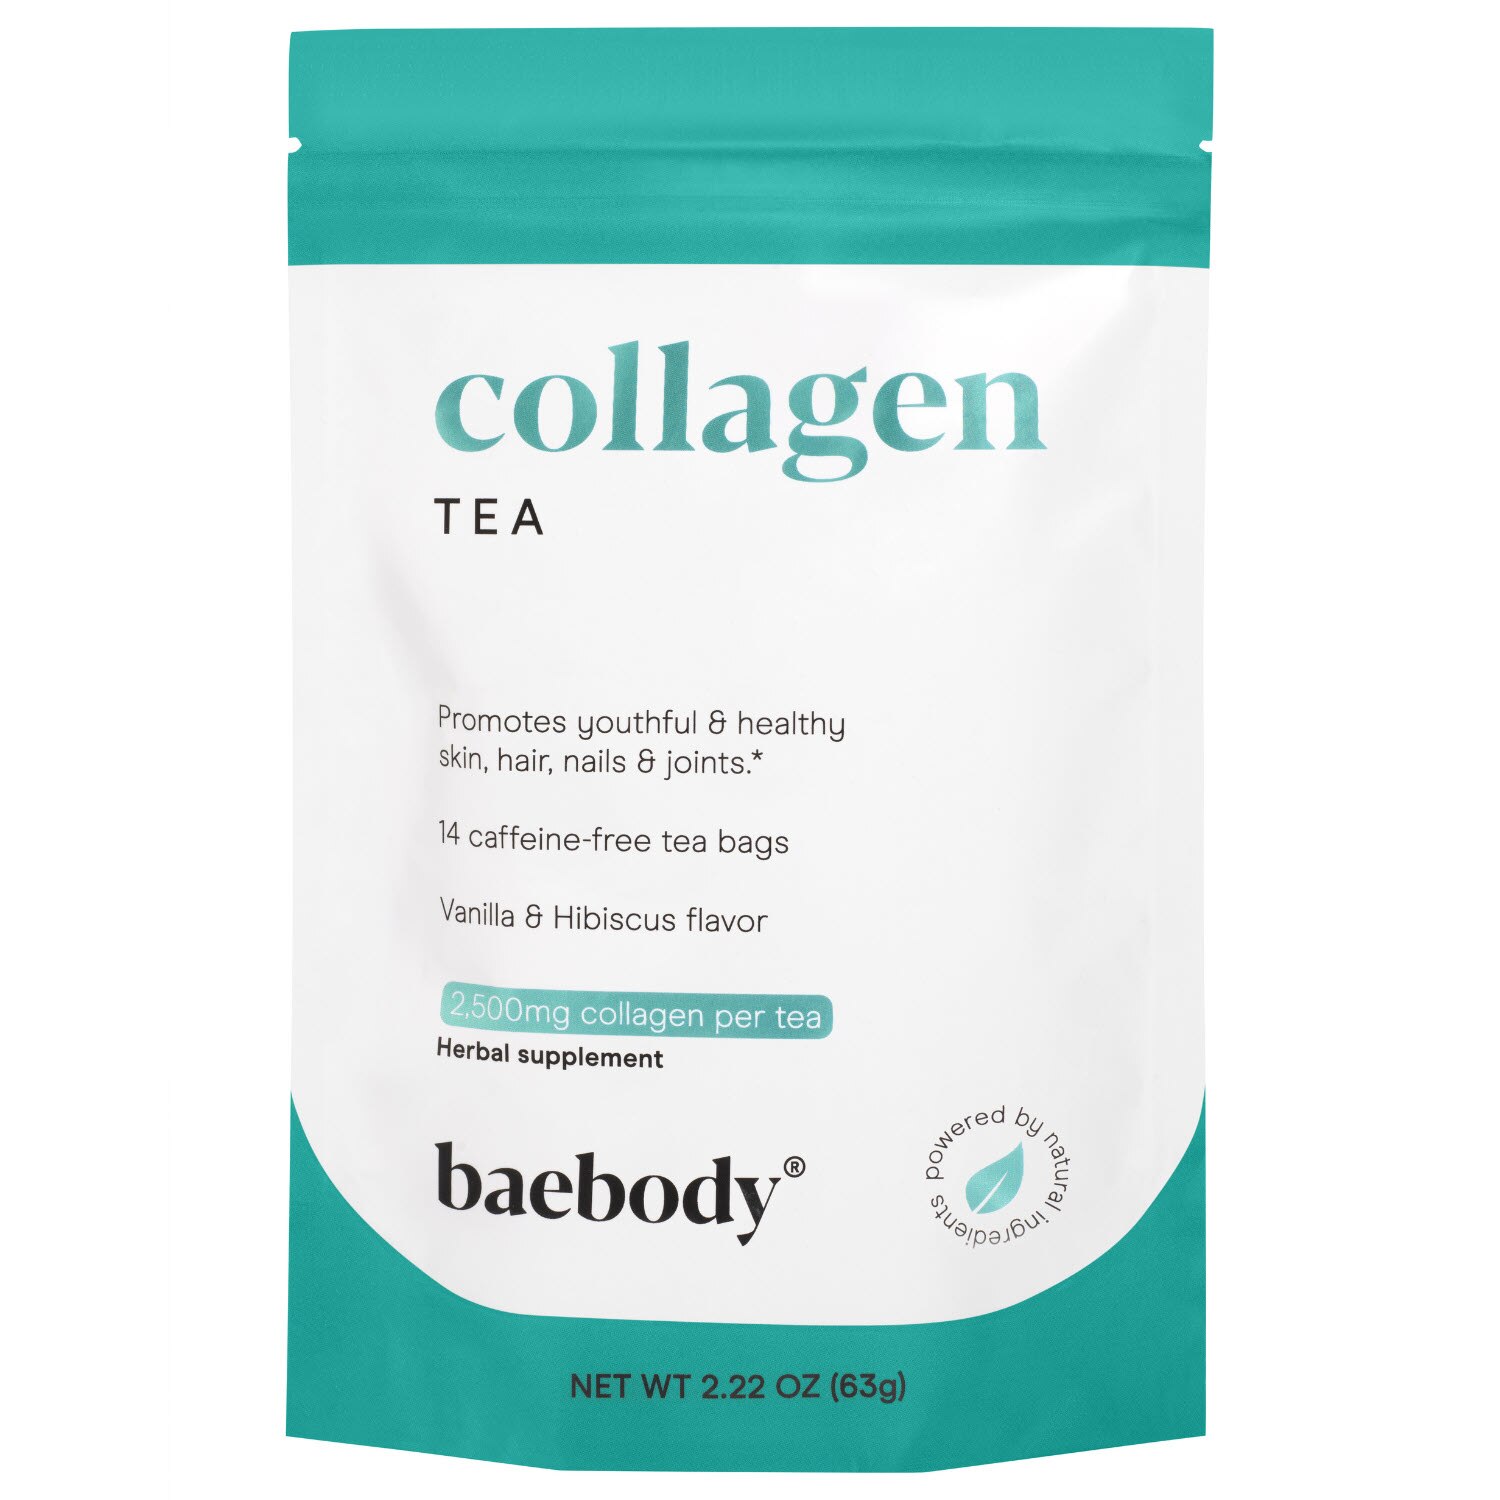 Baebody Collagen Tea for Youthful & Healthy Hair, Skin, Nails & Joints, 2.22 OZ